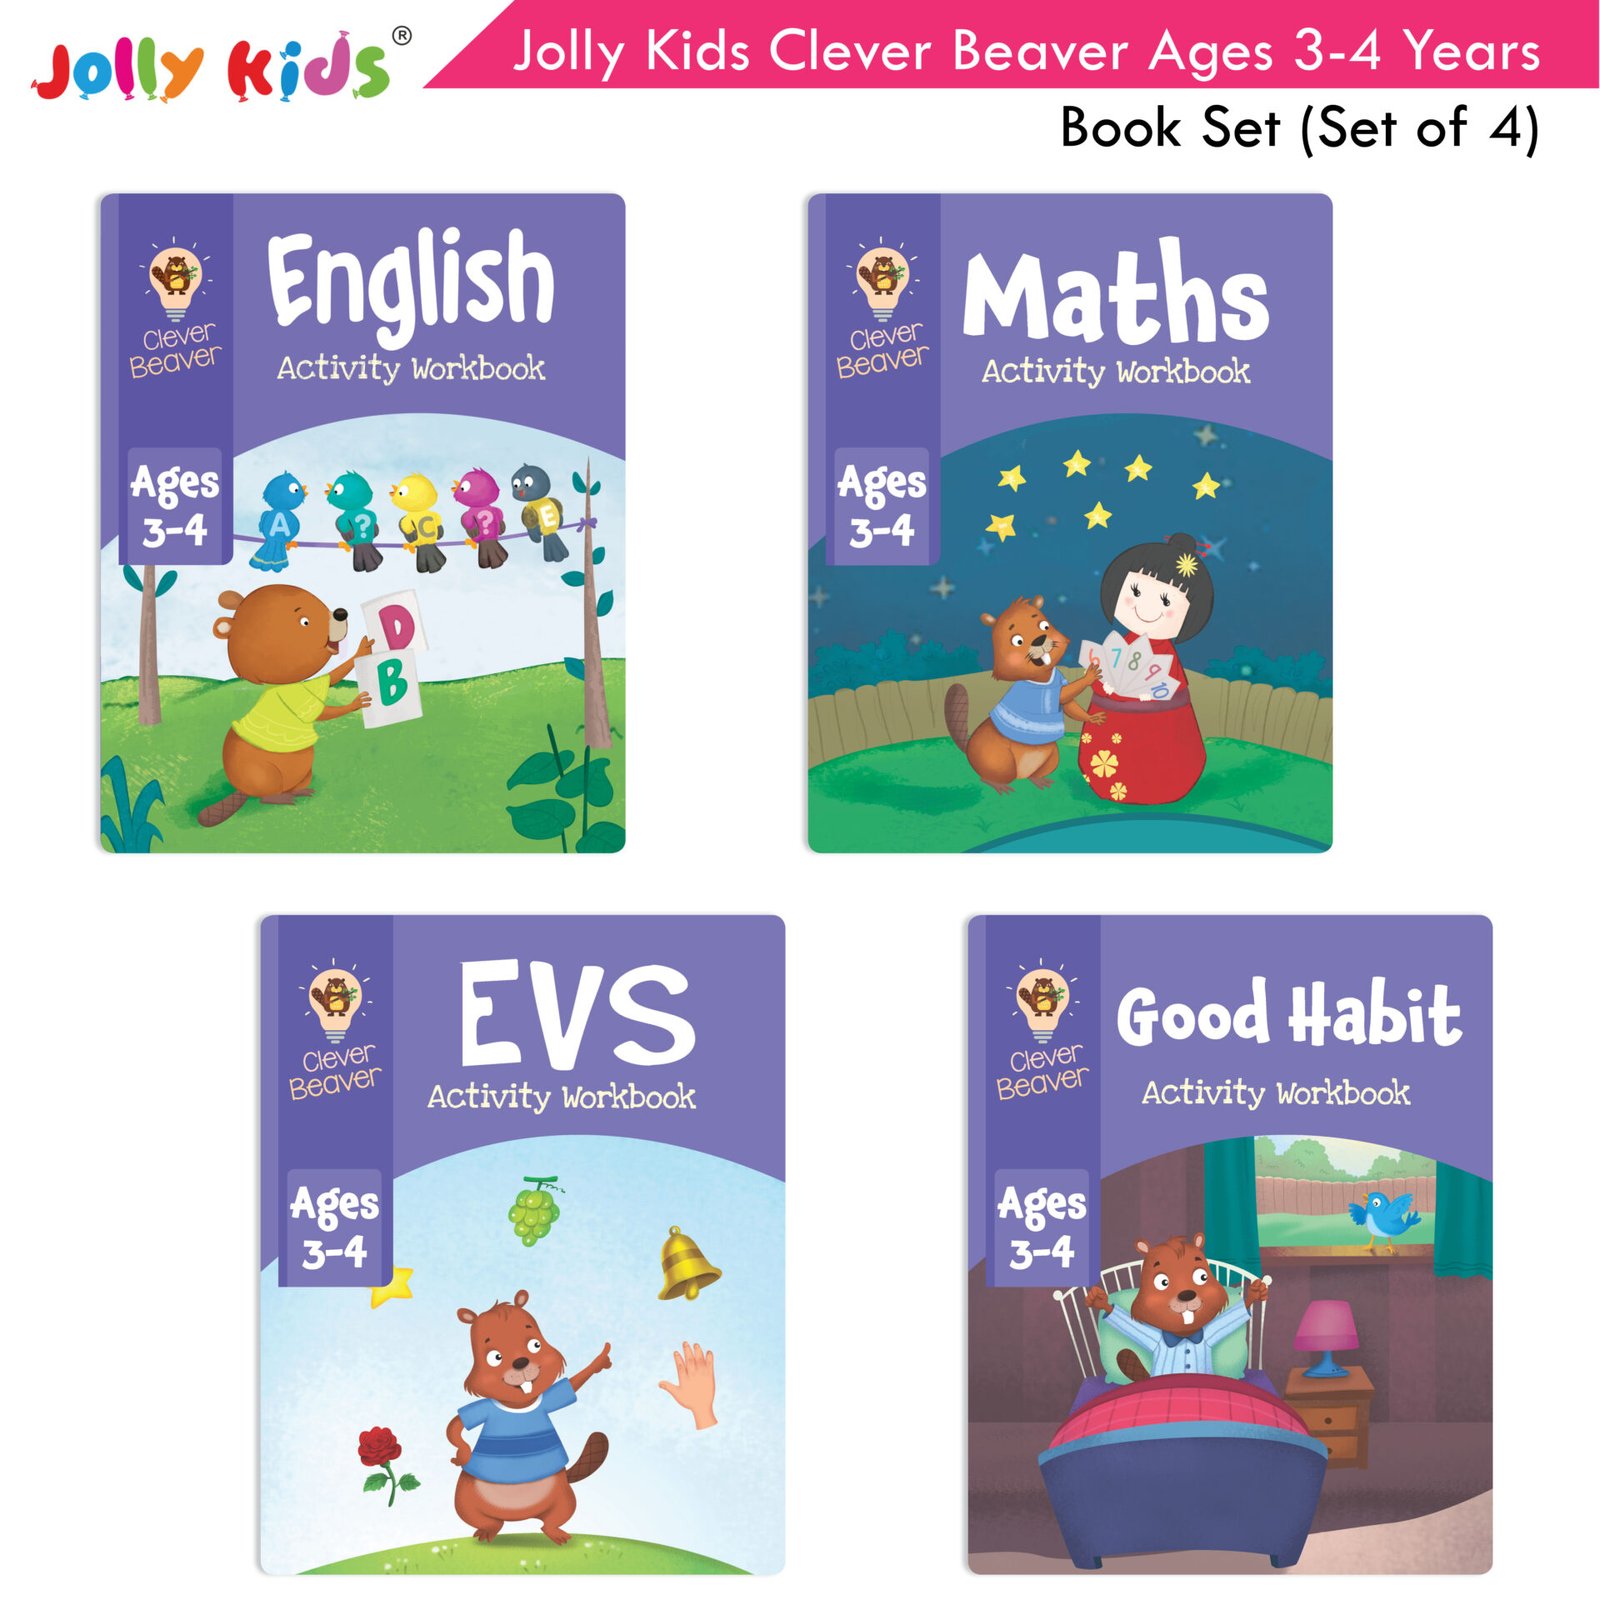 Jolly Kids Clever Beaver Ages 3 4 Years Book Set Set of 4 1